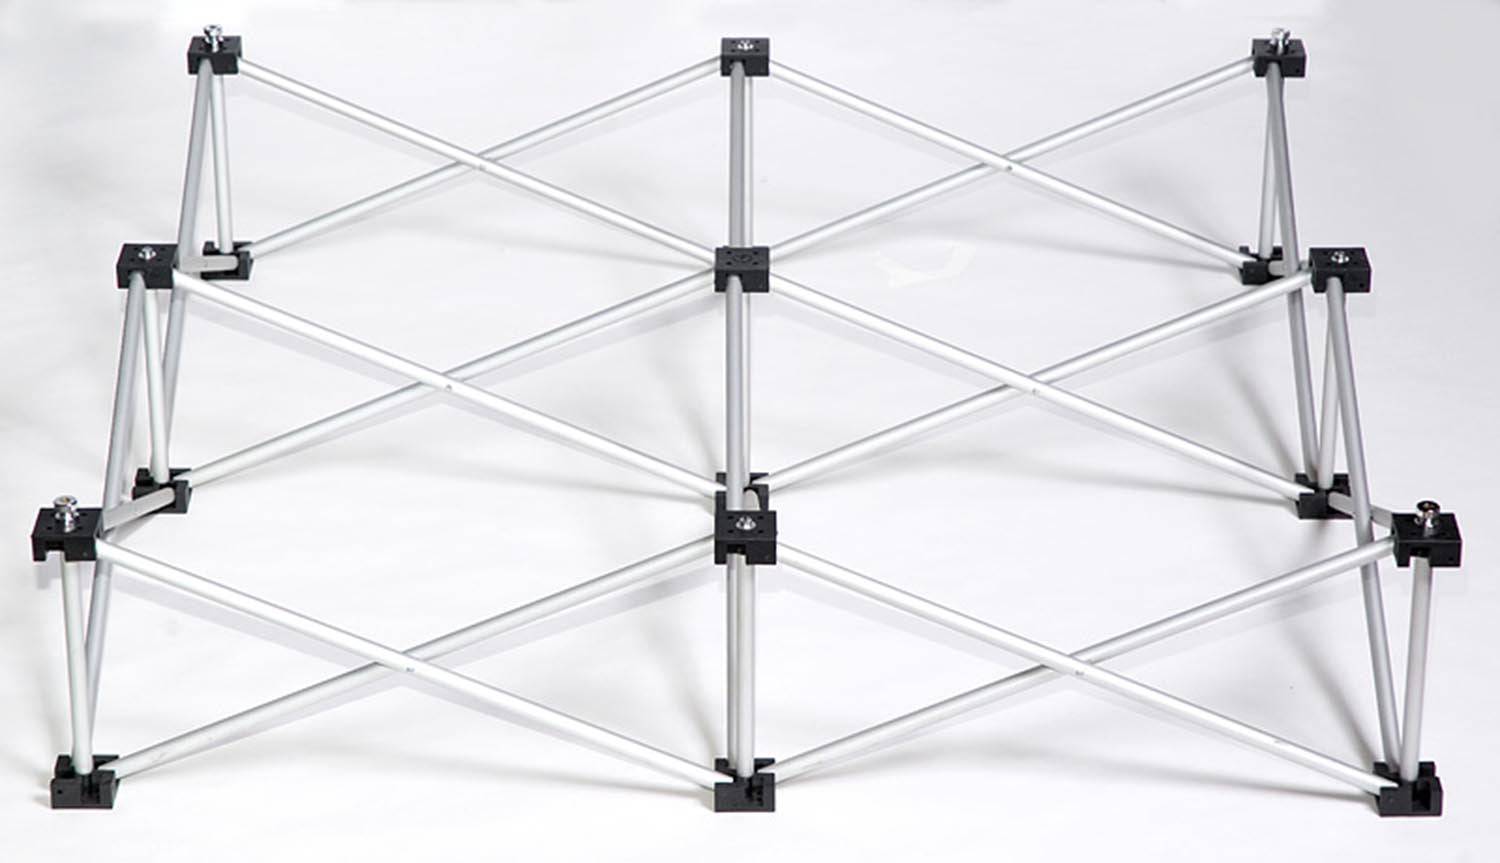 IntelliStage IS3X3X8, 8 Inches High Riser for 3FT x 3FT Square Stage Platform - Hollywood DJ